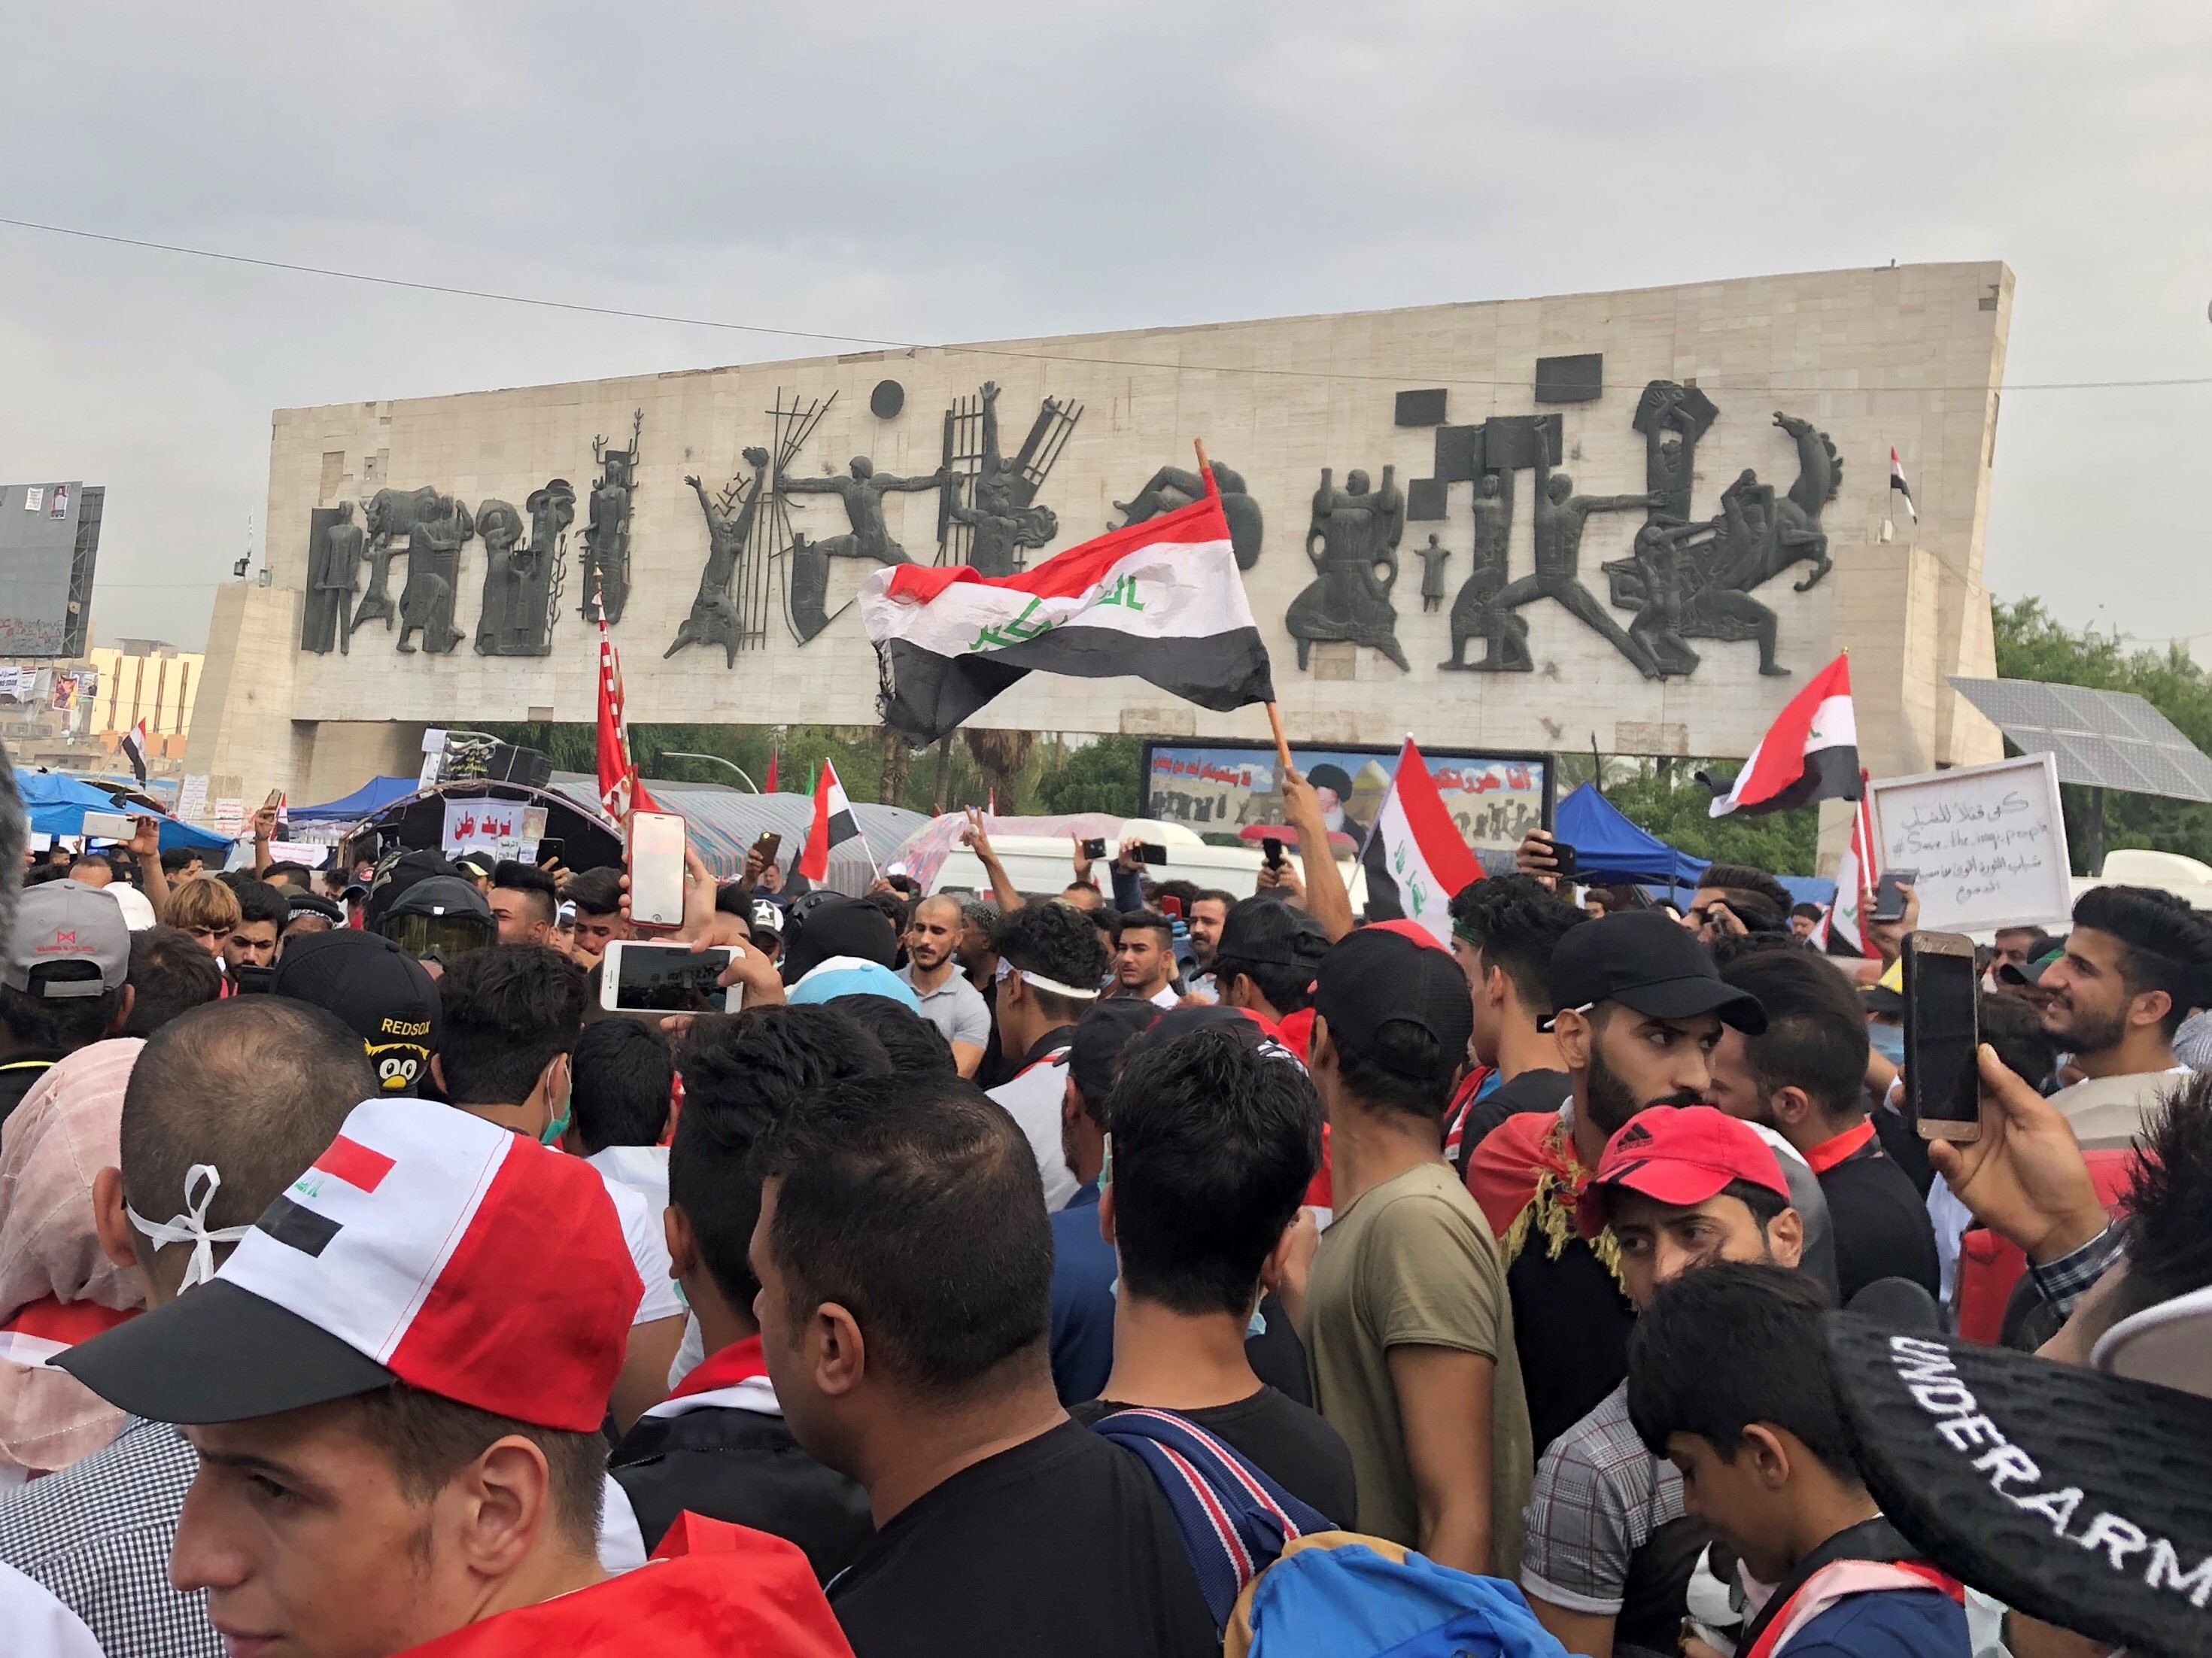 An anti-corruption protest erupted in Tahrir area